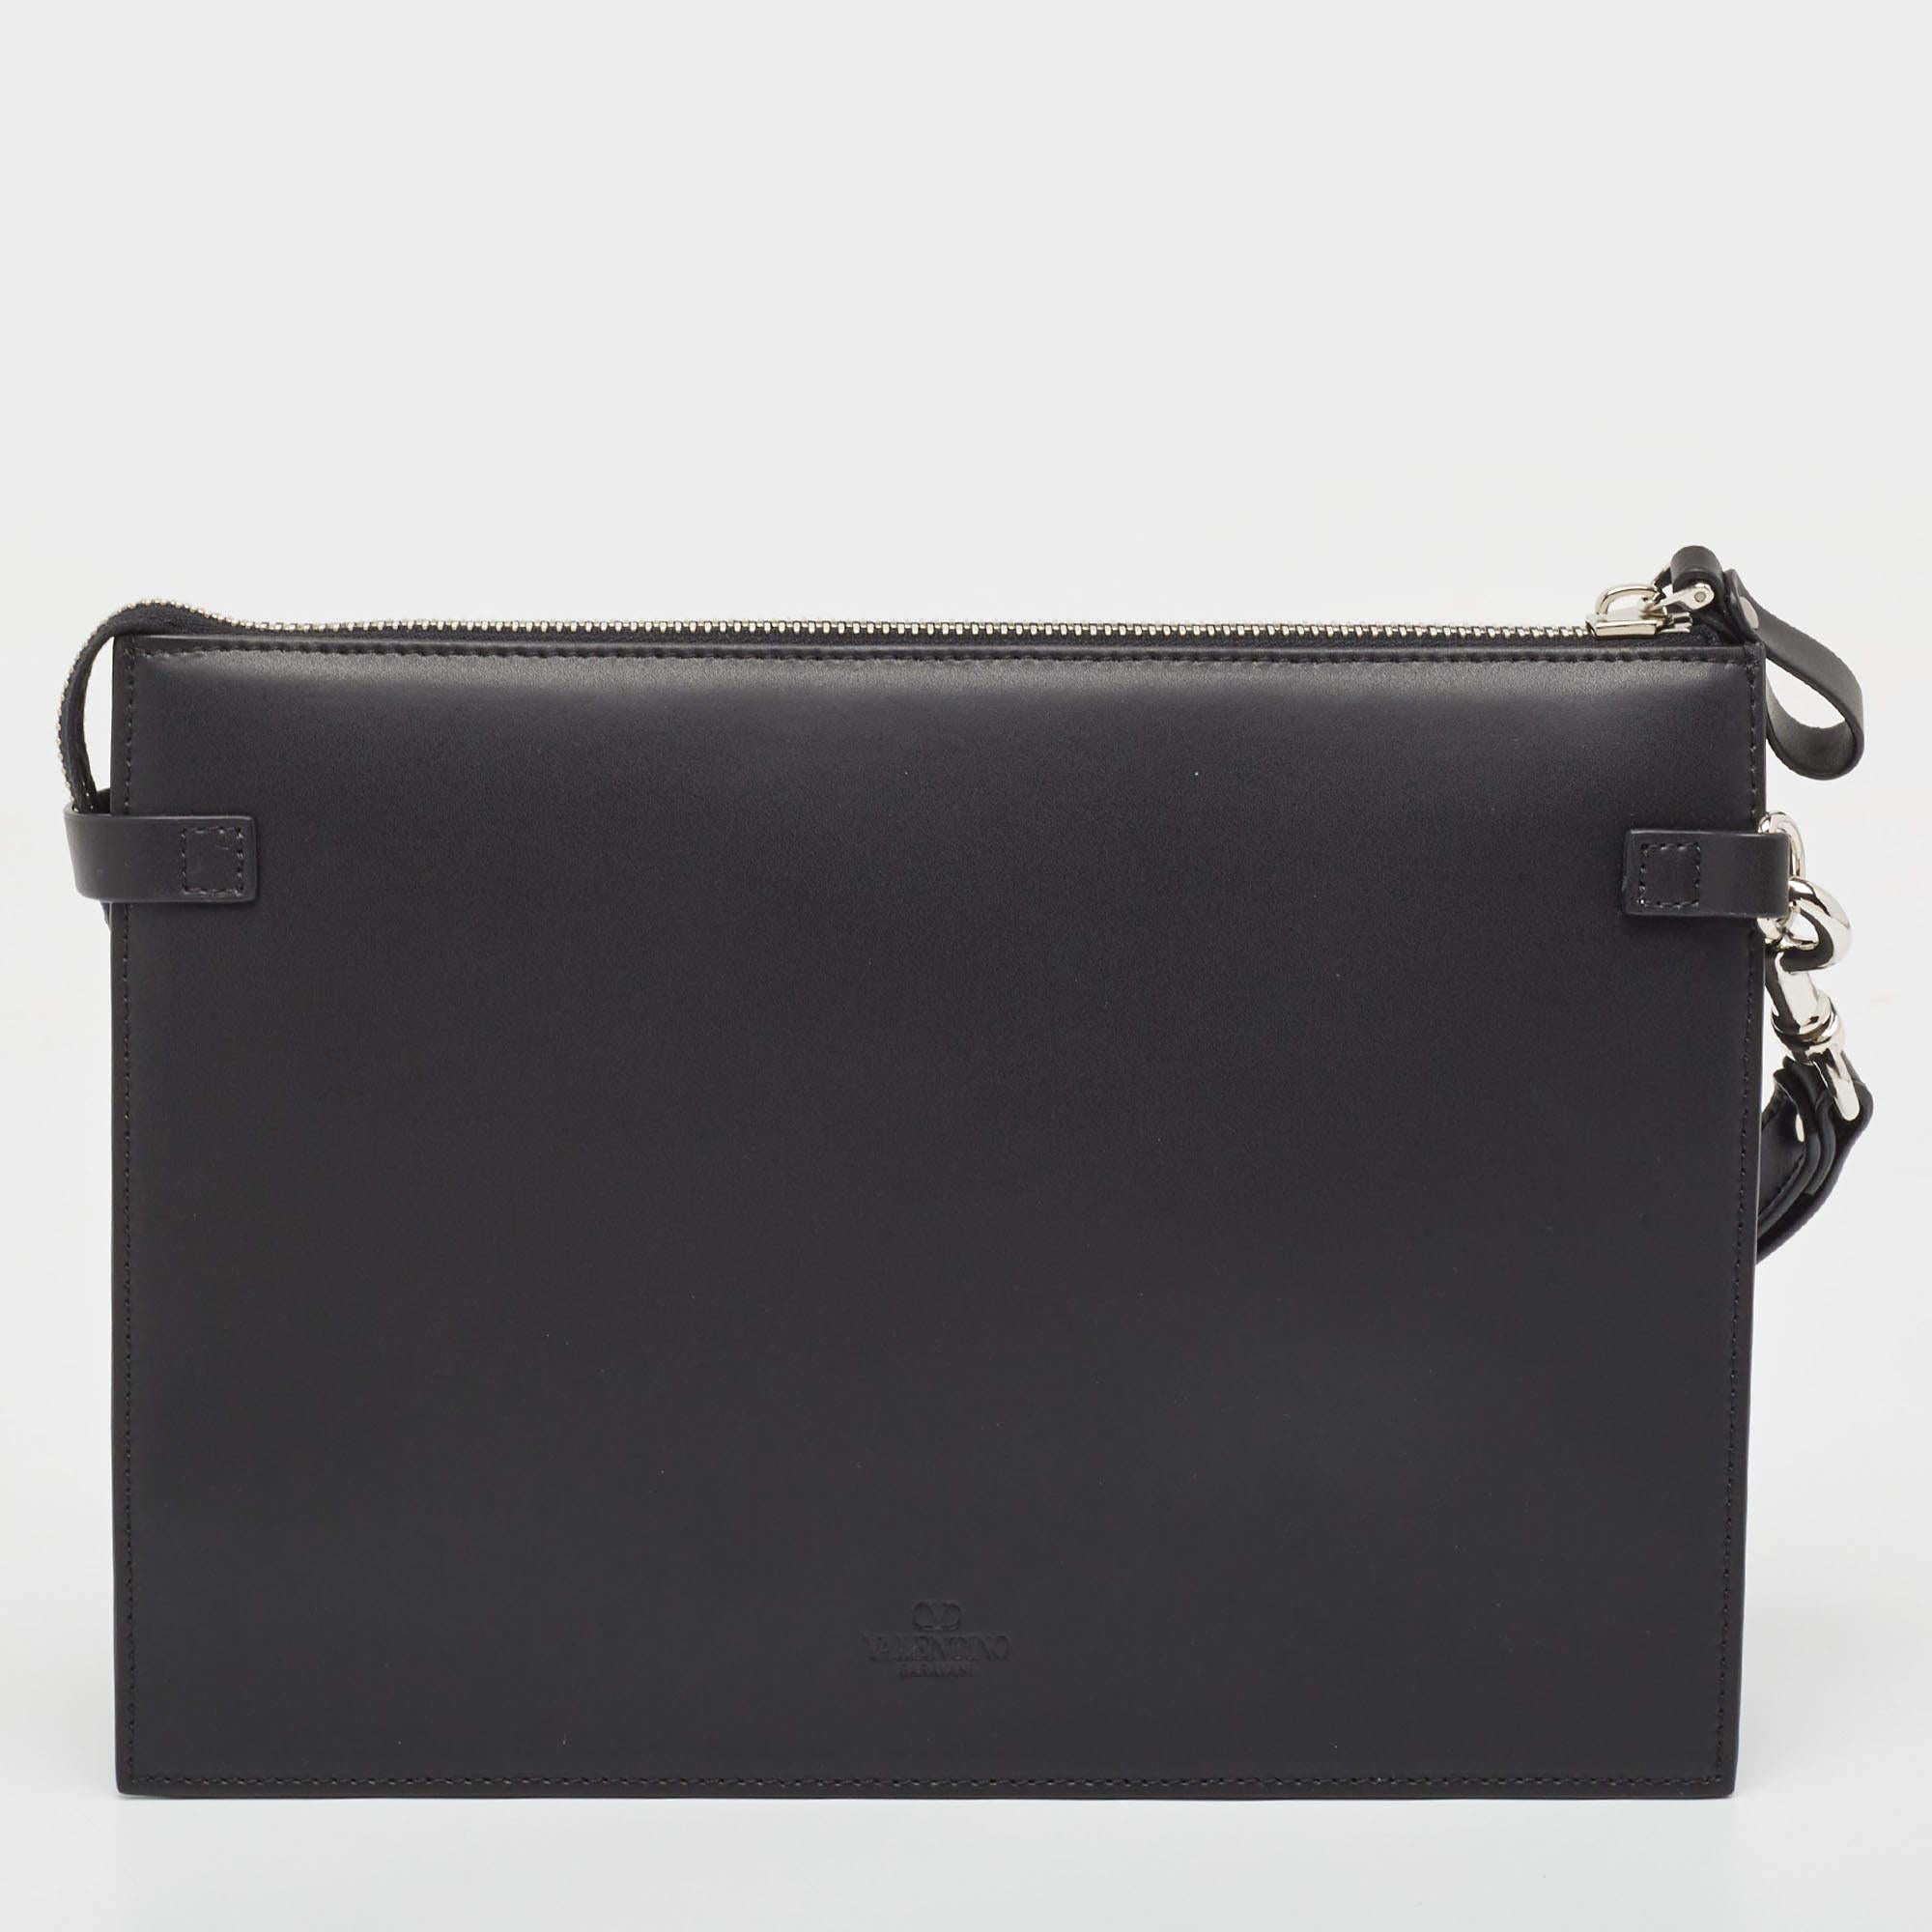 This Valentino clutch is just the right accessory to compliment your stylish ensemble. It comes crafted in quality material featuring a well-sized interior that can comfortably hold all your little essentials.

Includes: Original Dustbag, Original